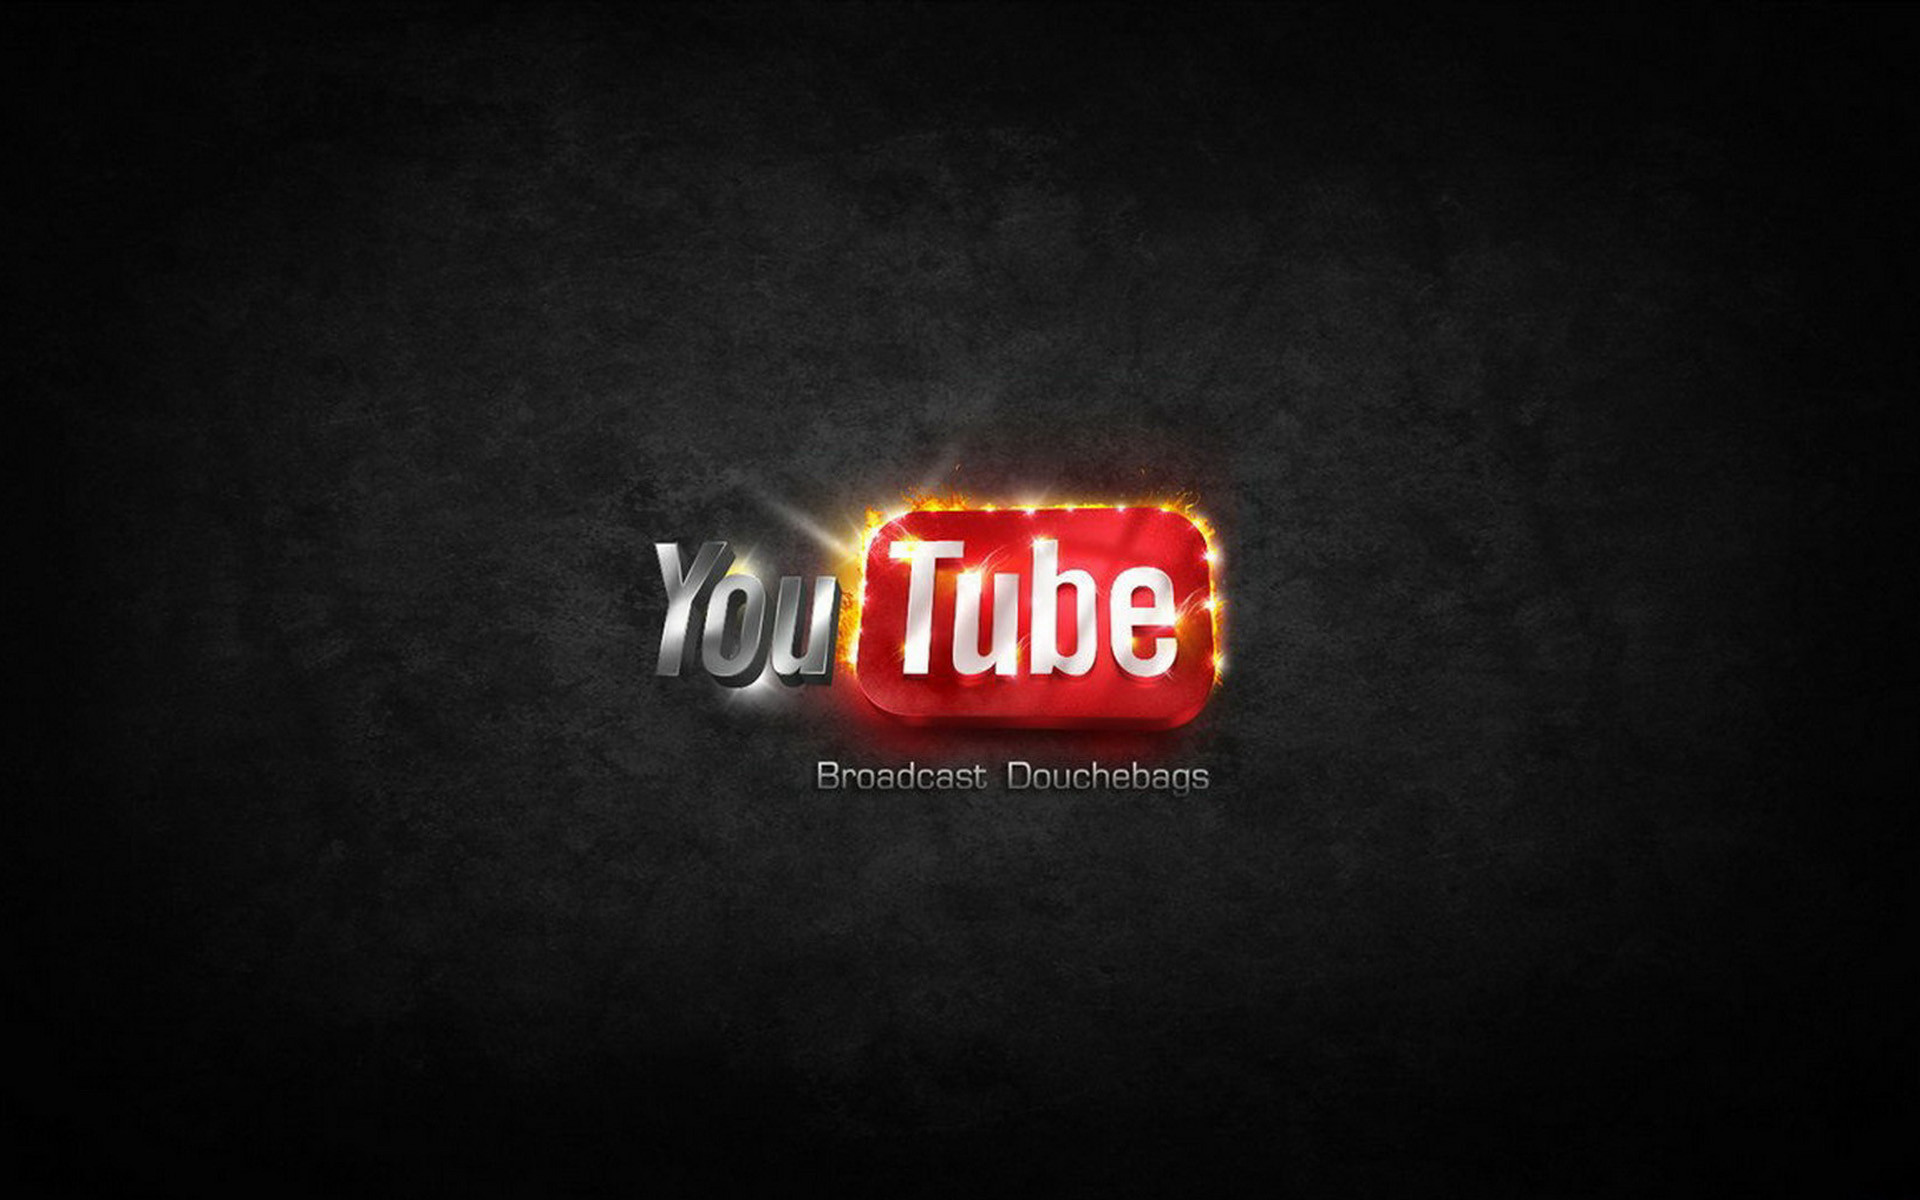 1920x1200 Youtube Backgrounds Free Download.